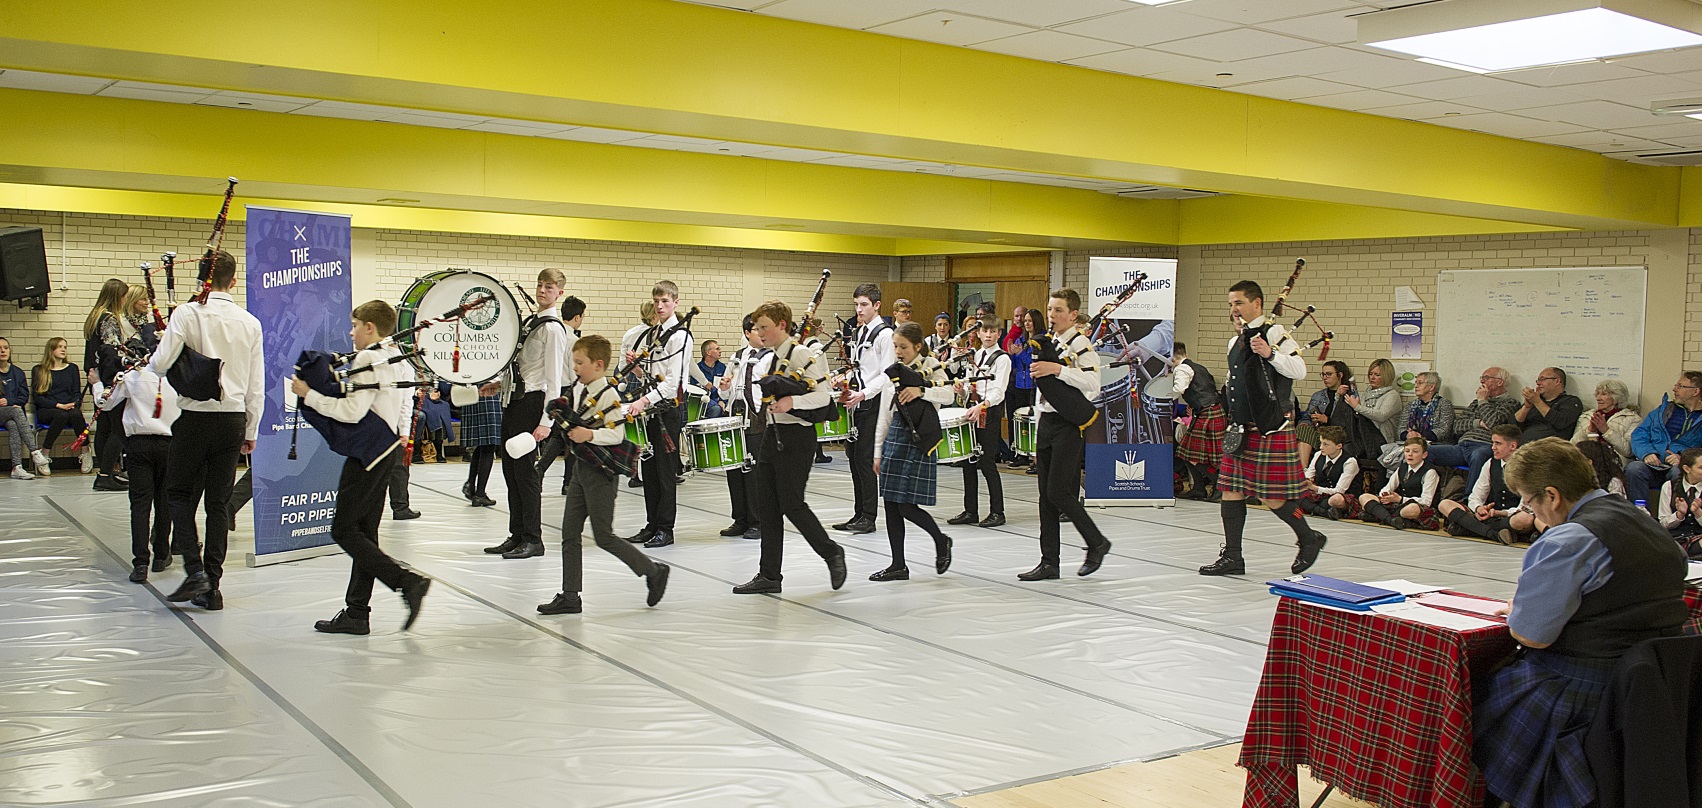 St Columba's Competes at Scottish Schools' Pipe Band Championships